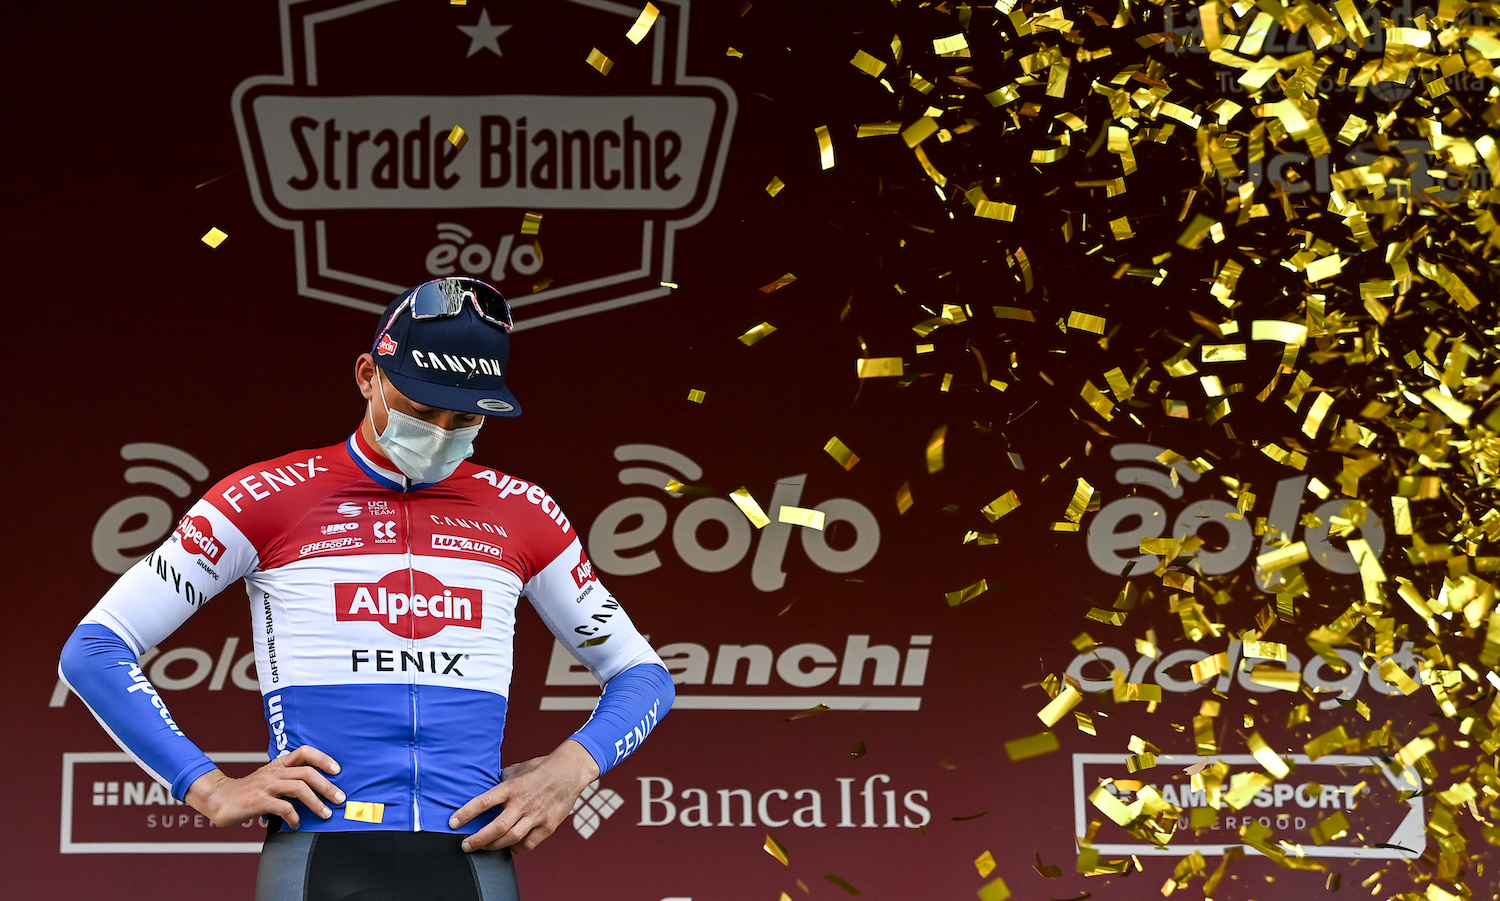 Dutch Mathieu van der Poel of Alpecin-Fenix celebrates on the podium after winning the 'Strade Bianche' one day cycling race (184km) from and to Siena, Italy, Saturday 06 March 2021. BELGA PHOTO DIRK WAEM (Photo by DIRK WAEM/BELGA MAG/AFP via Getty Images)